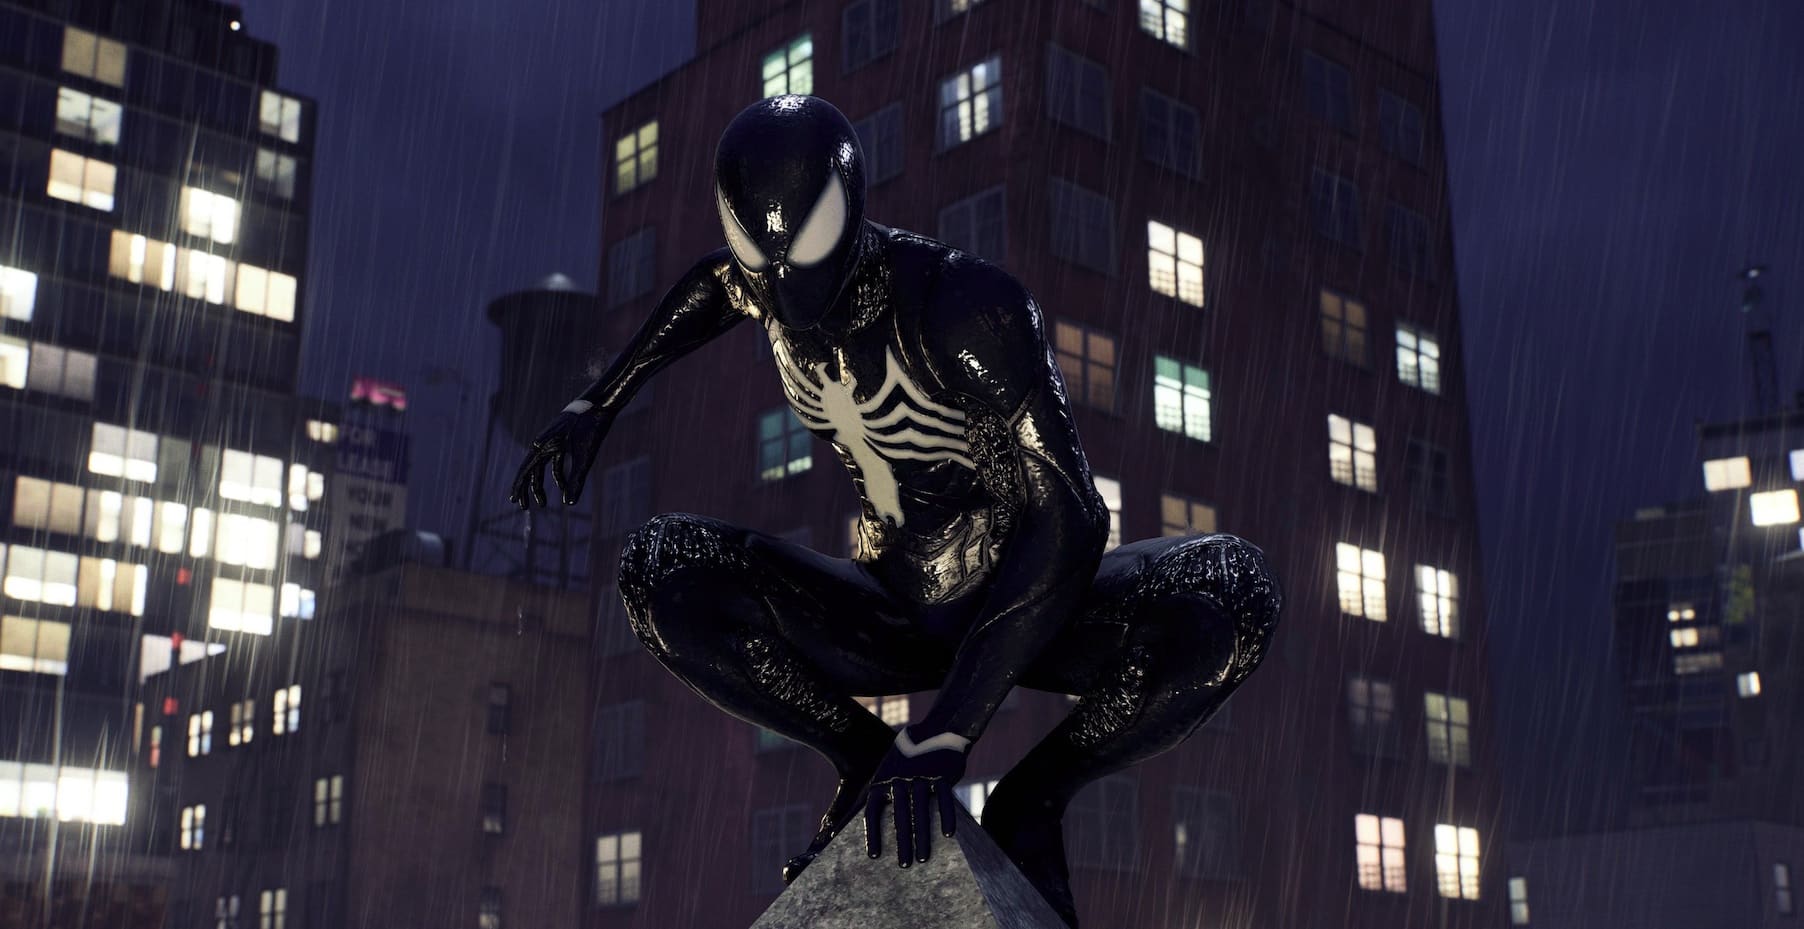 Marvel's Spider-Man 2 Review Scores - Swinging To The Top